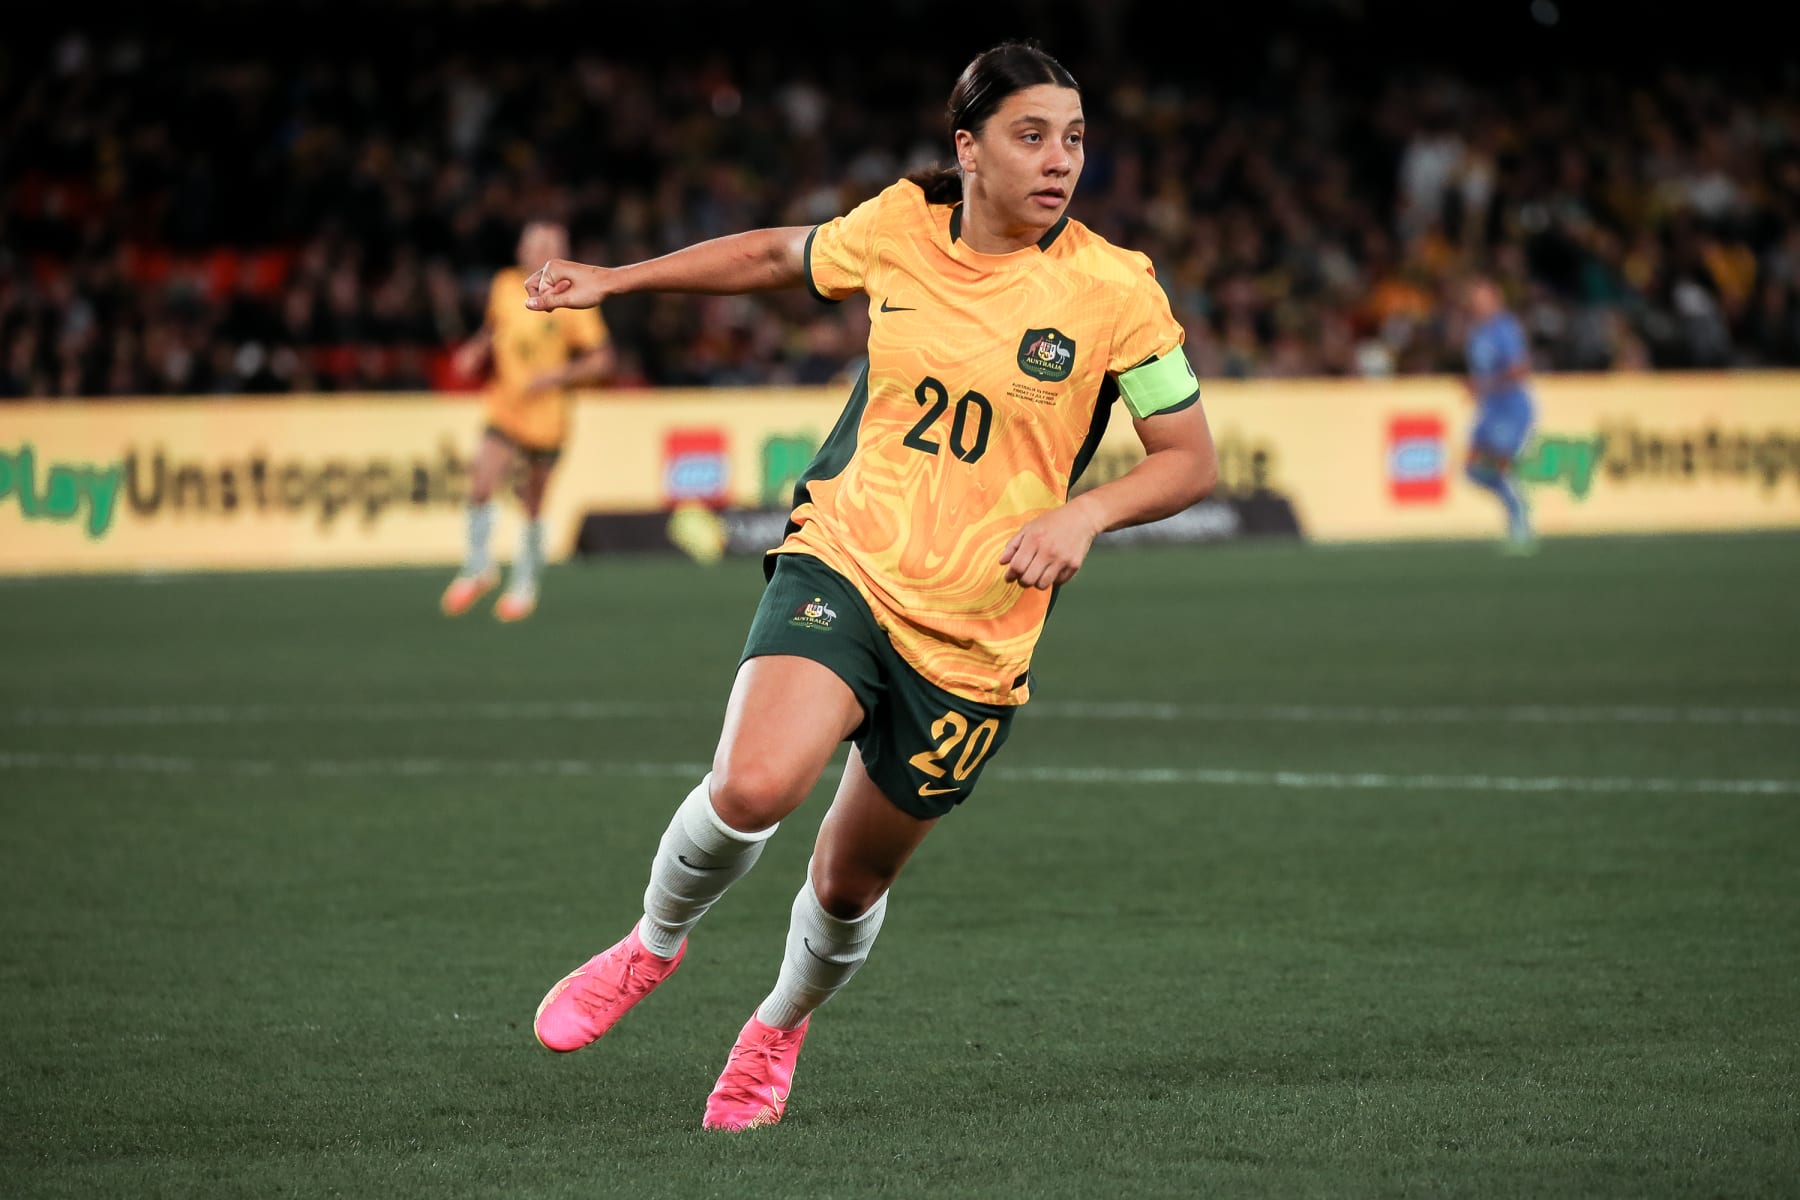 Ten players to watch out for at the 2023 Women's World Cup